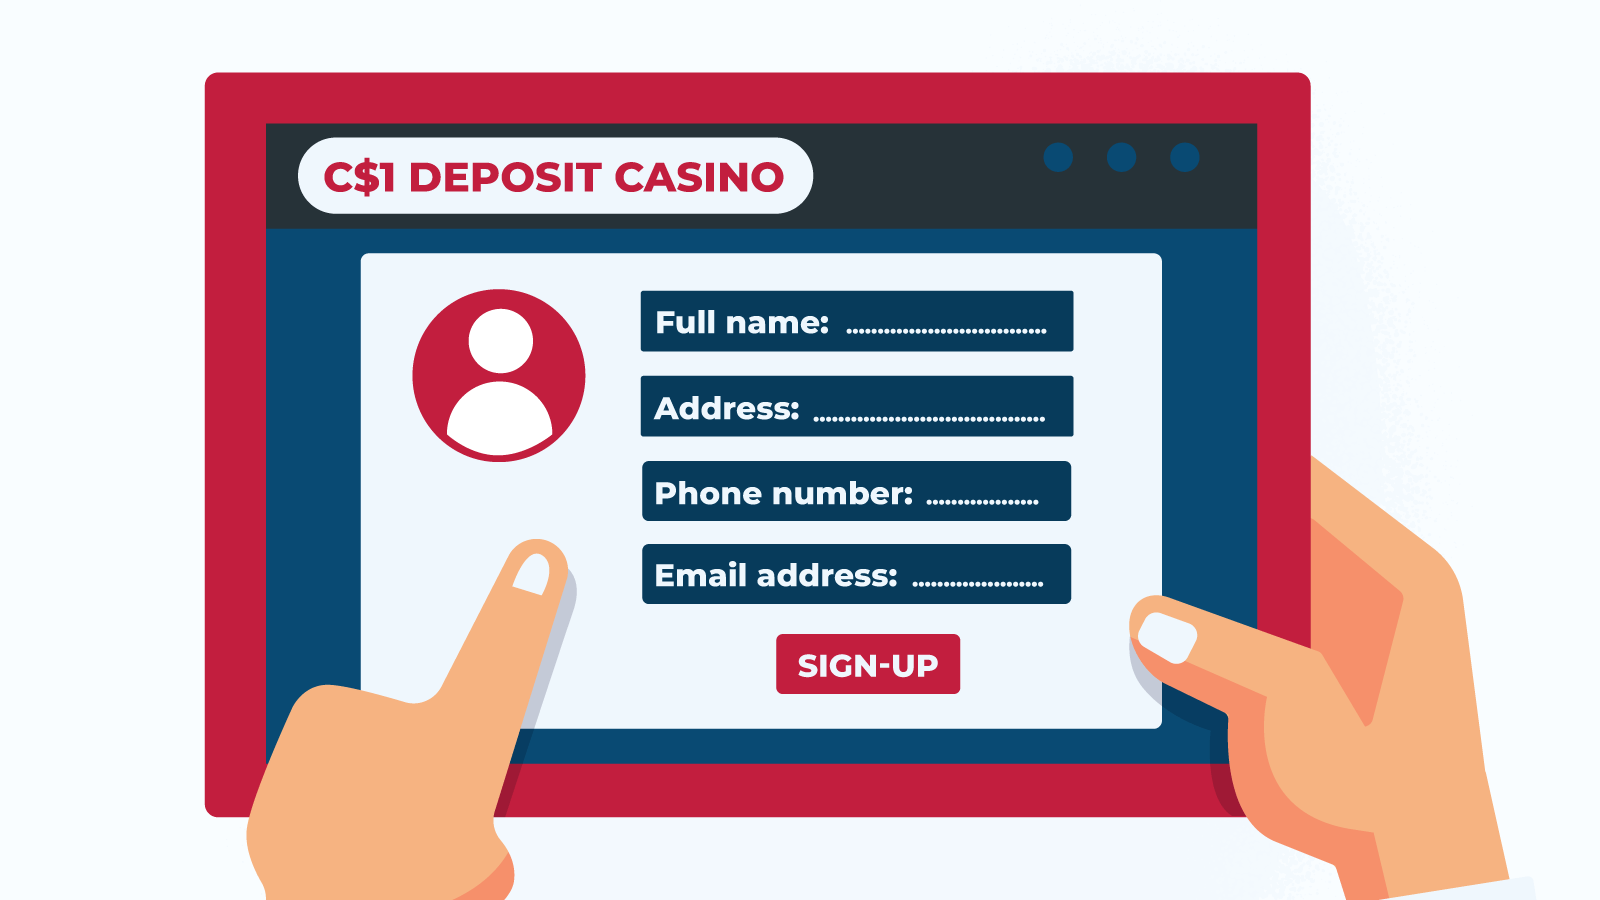 How to Join a $1 Deposit Casino Canada Site